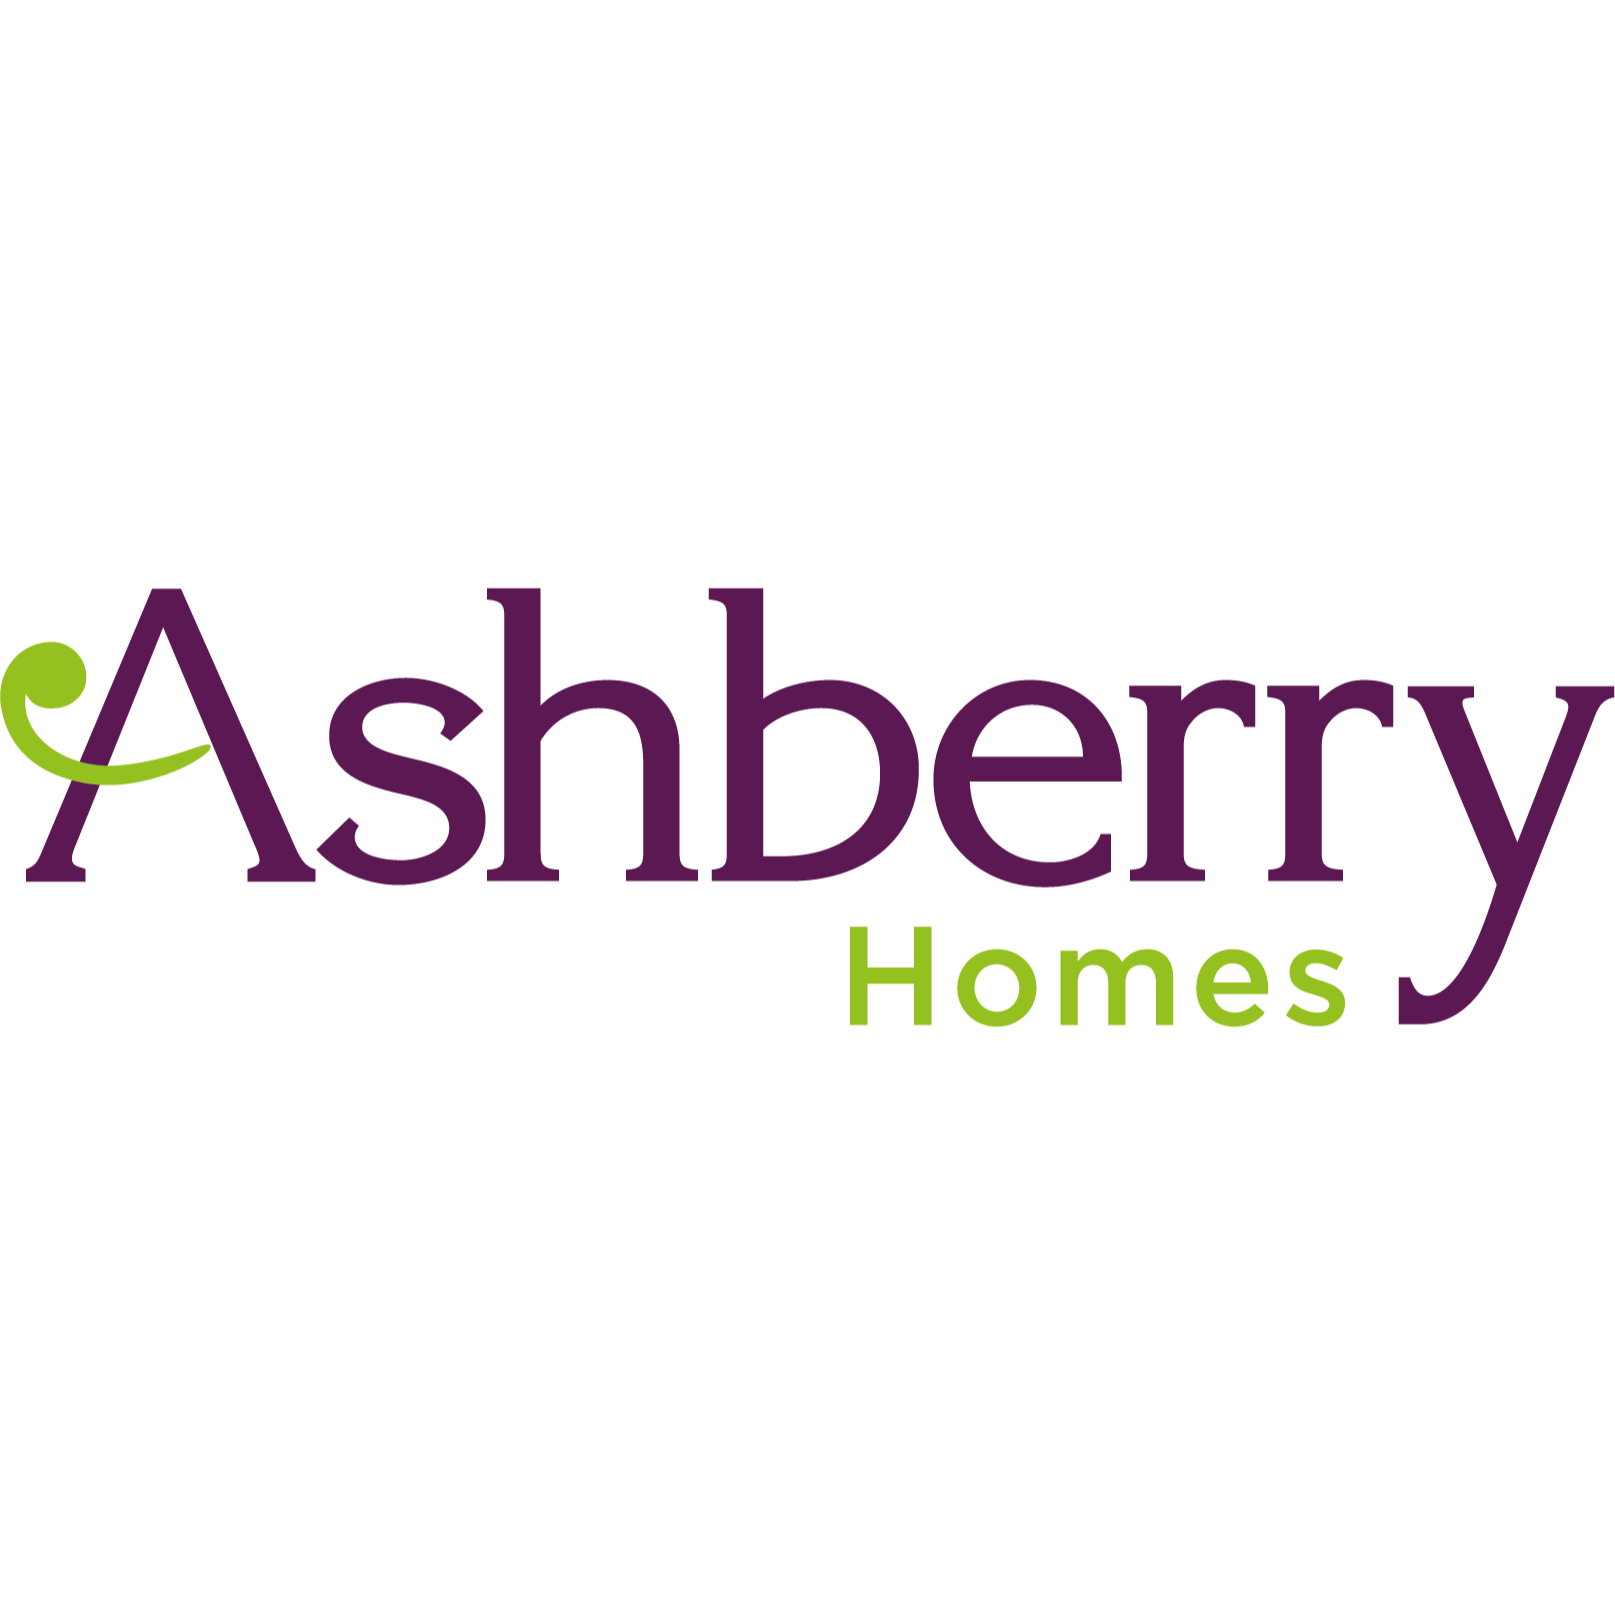 Ashberry Homes - Chellaston Fold Derby 01163 502399